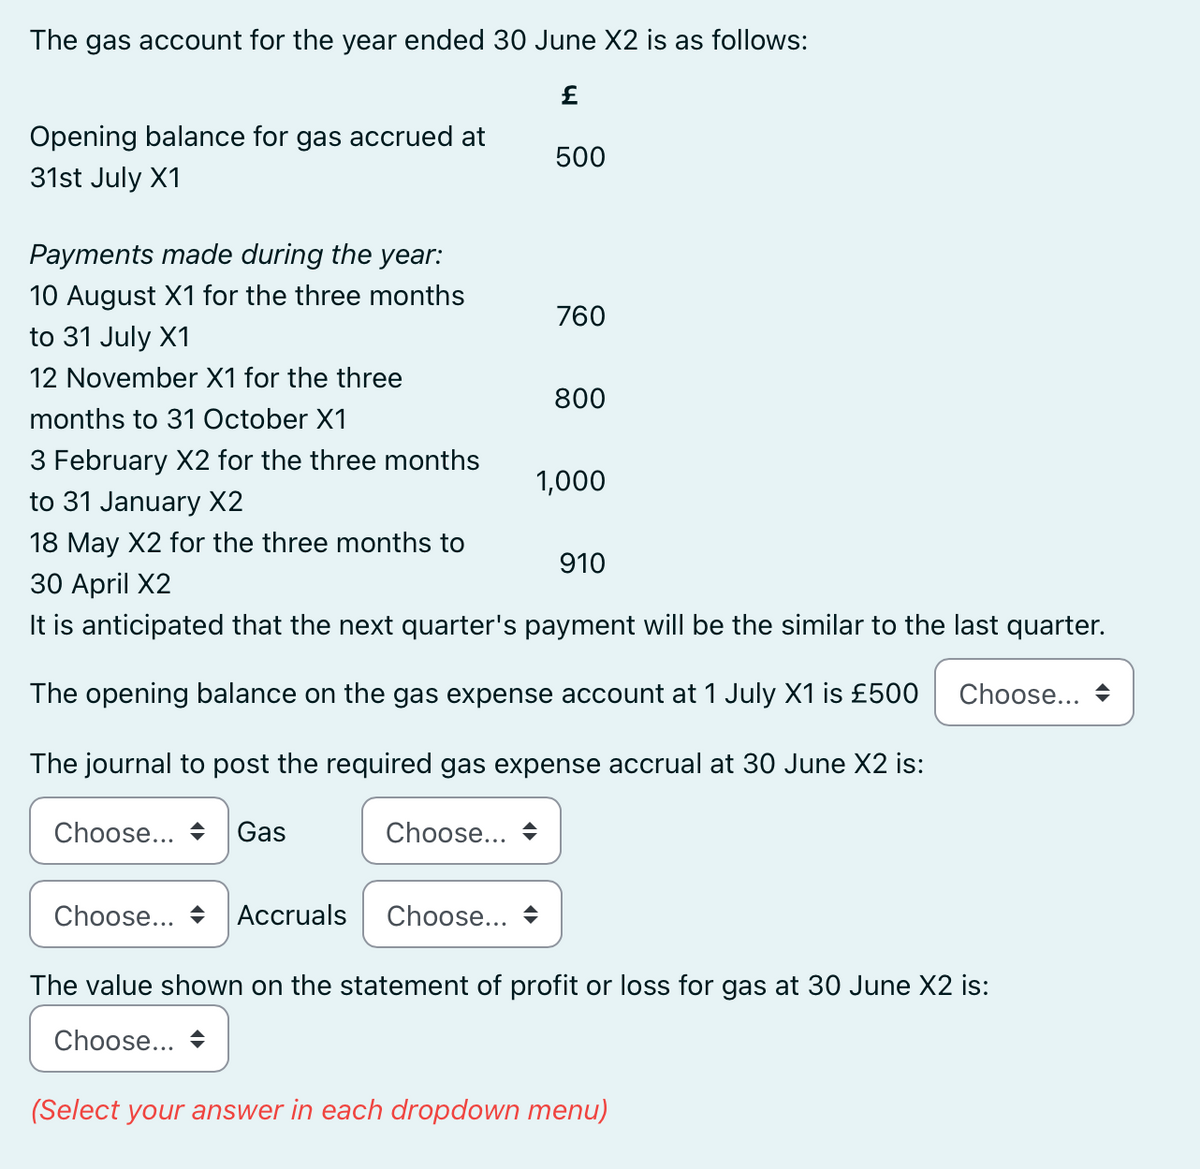 The gas account for the year ended 30 June X2 is as follows:
£
Opening balance for gas accrued at
31st July X1
Payments made during the year:
10 August X1 for the three months
to 31 July X1
12 November X1 for the three
months to 31 October X1
3 February X2 for the three months
to 31 January X2
18 May X2 for the three months to
30 April X2
It is anticipated that the next quarter's payment will be the similar to the last quarter.
The opening balance on the gas expense account at 1 July X1 is £500
The journal to post the required gas expense accrual at 30 June X2 is:
Choose...
Choose... Gas
500
Choose... Accruals Choose...
760
800
1,000
910
Choose...
The value shown on the statement of profit or loss for gas at 30 June X2 is:
Choose...
(Select your answer in each dropdown menu)